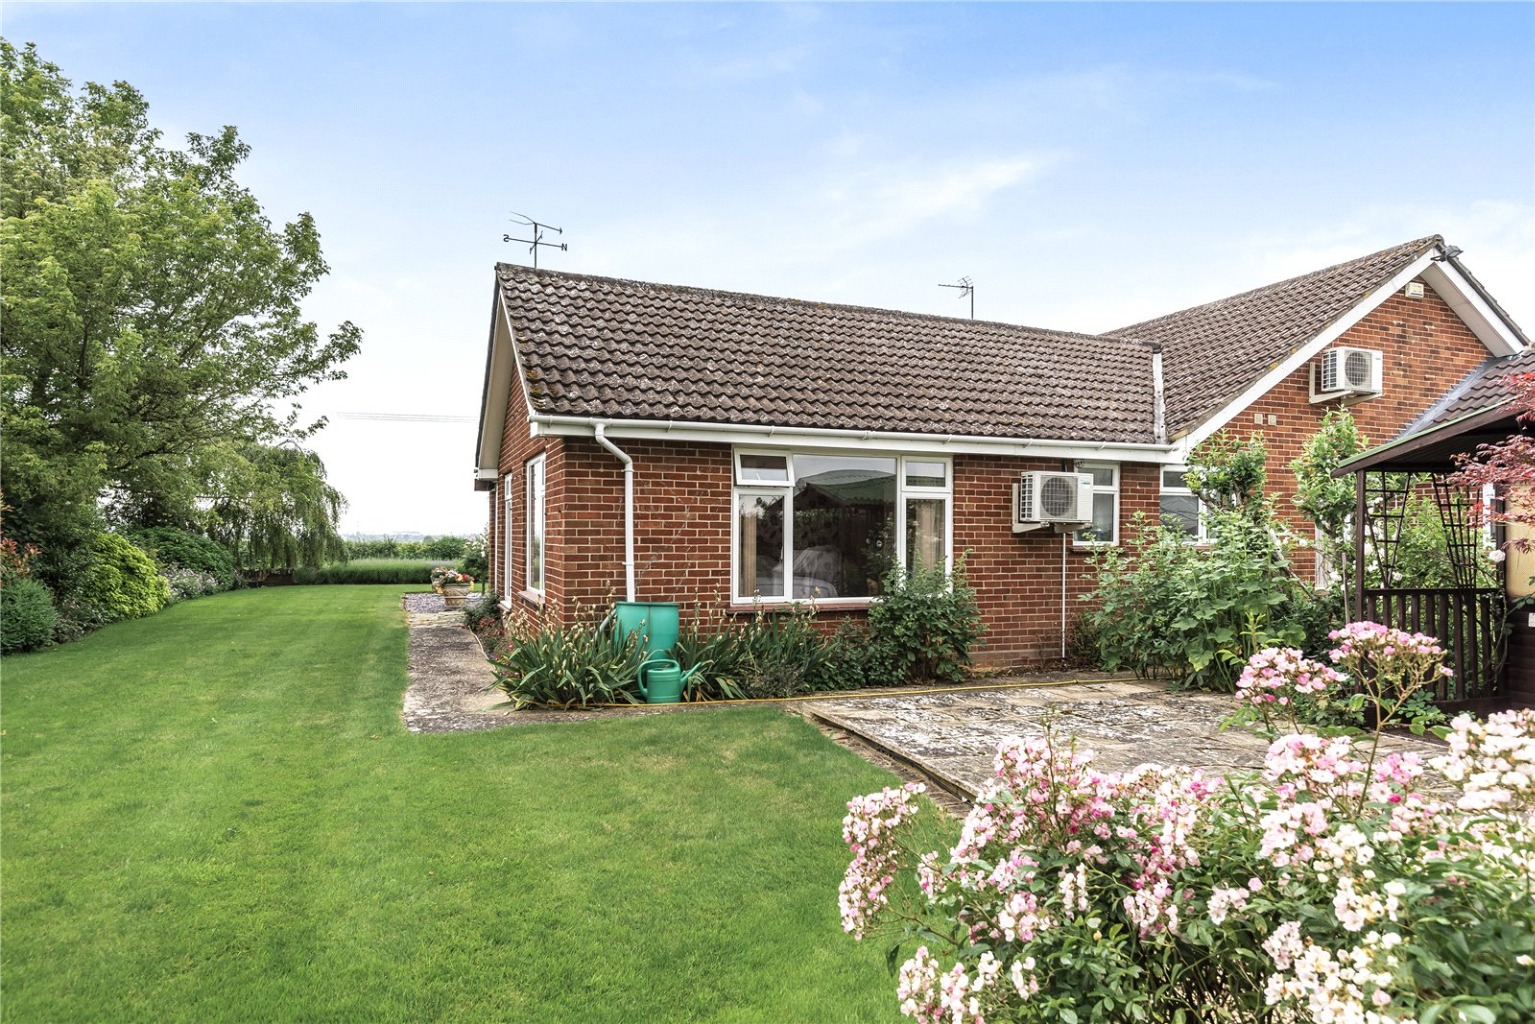 3 bed detached house for sale in Wintringham, St. Neots 2